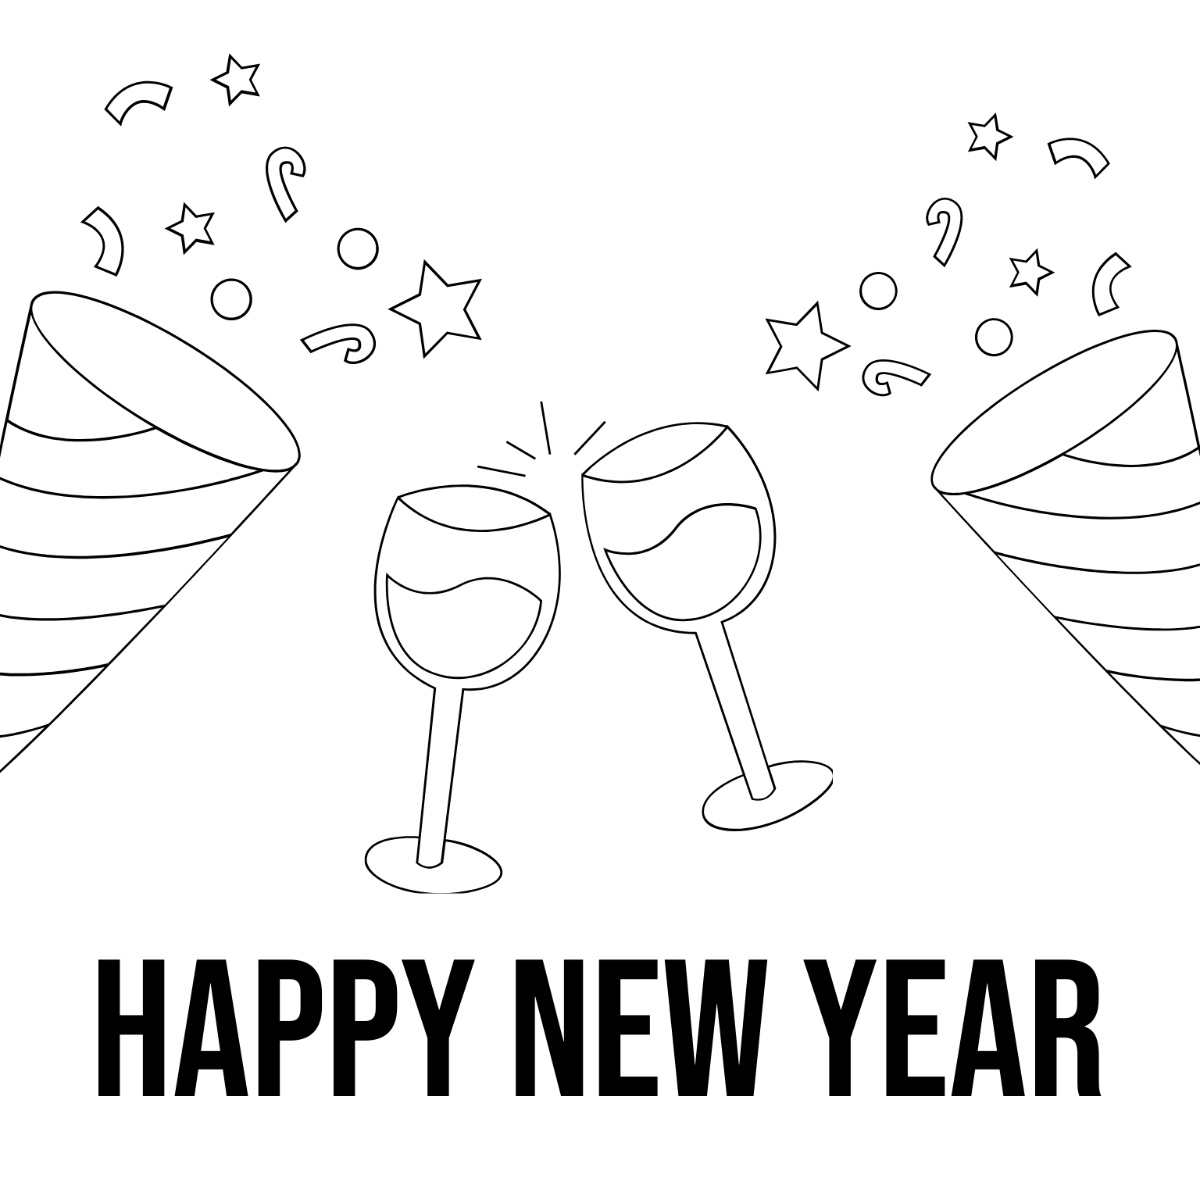 New Year's Day Image Drawing Template